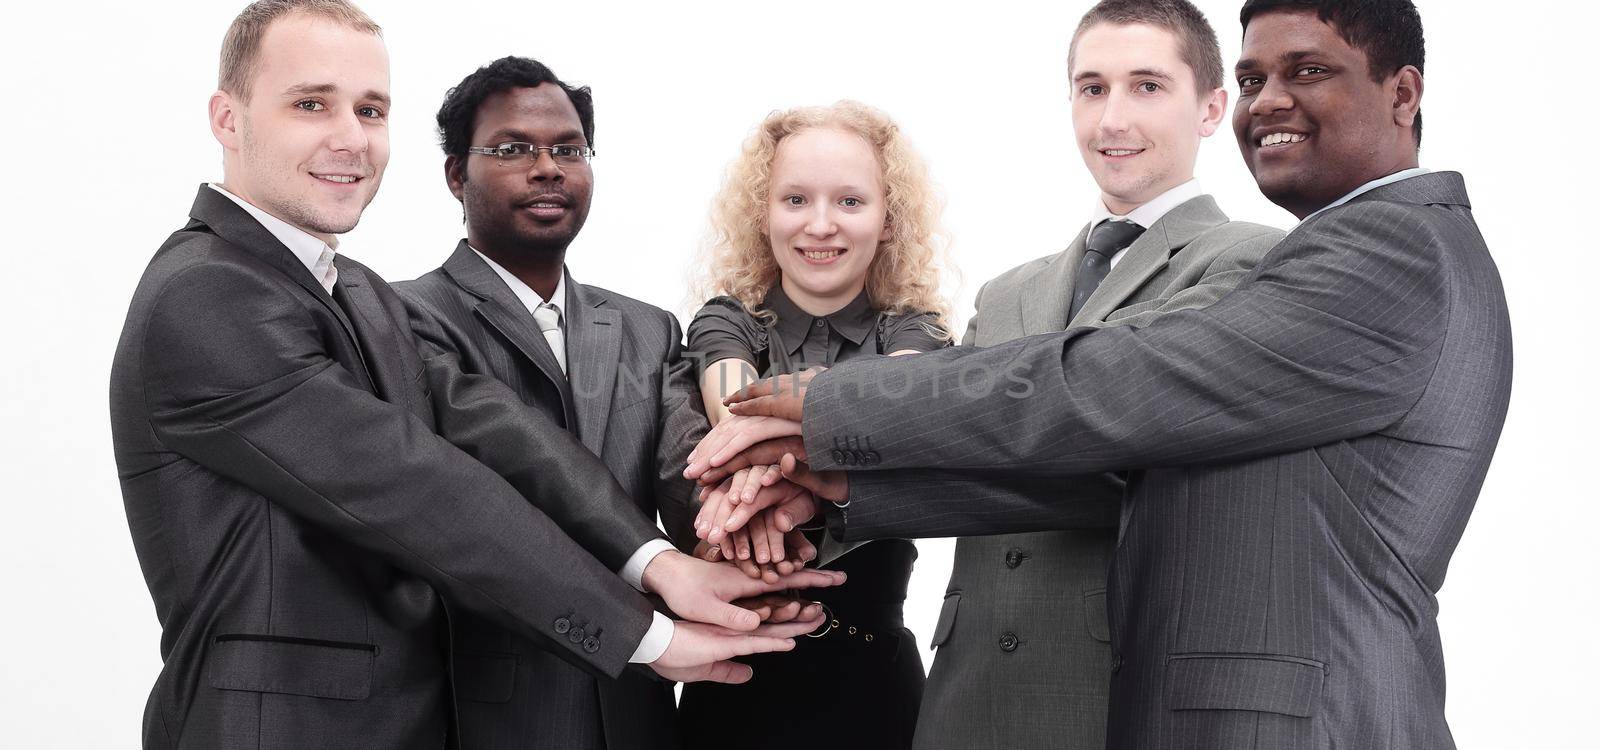 Business team showing union with their hands together forming a pile by SmartPhotoLab